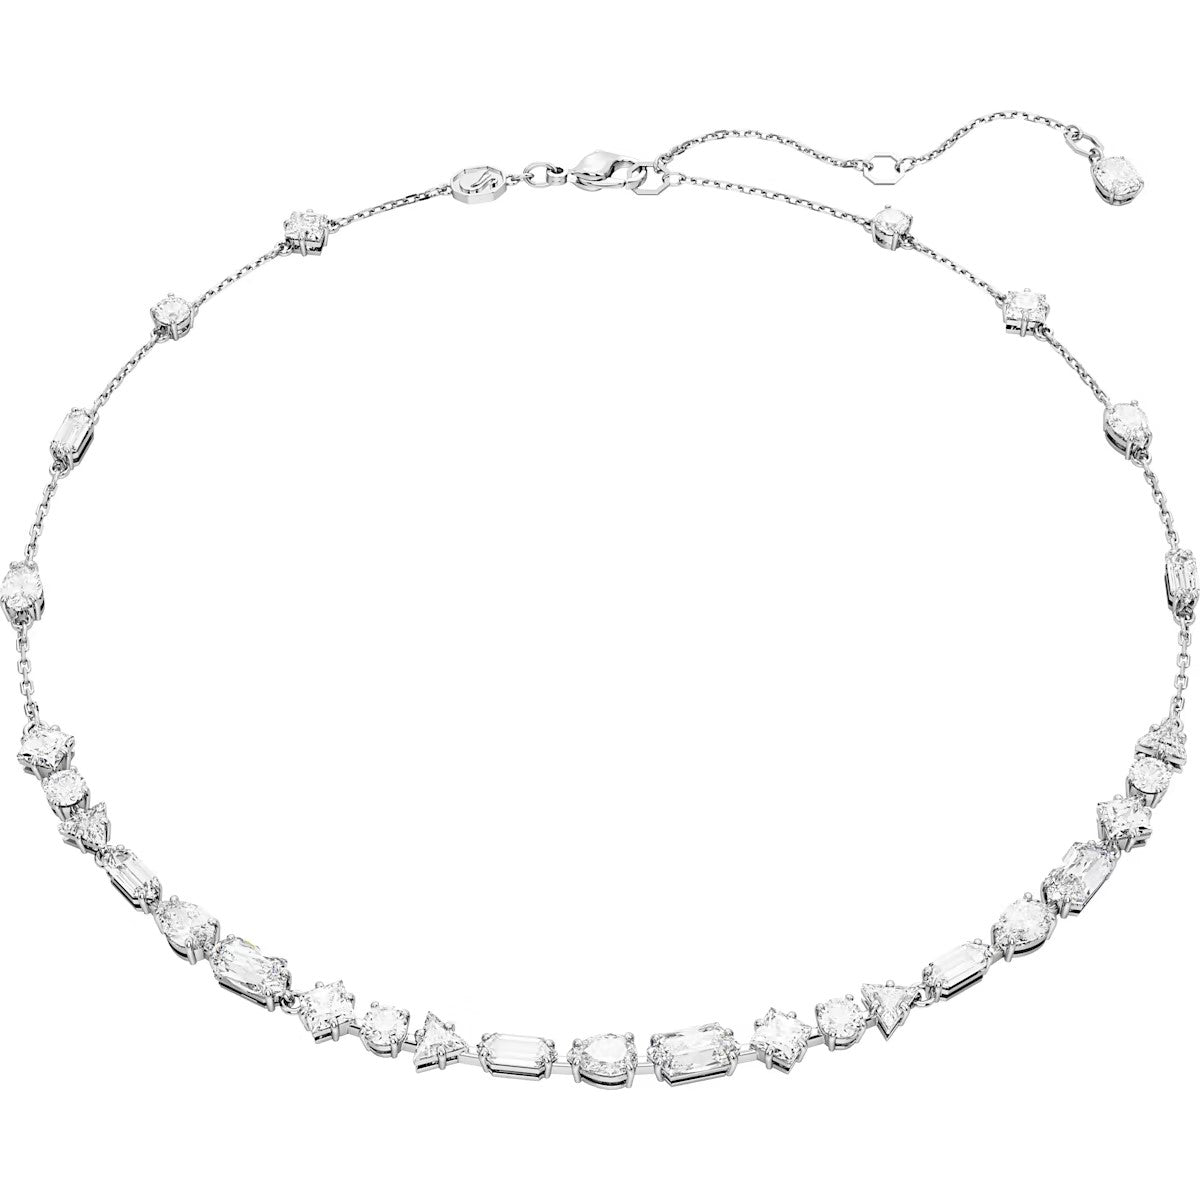 Swarovski Mesmera necklace, Mixed cuts, Scattered design, White, Rhodium plated 5676989